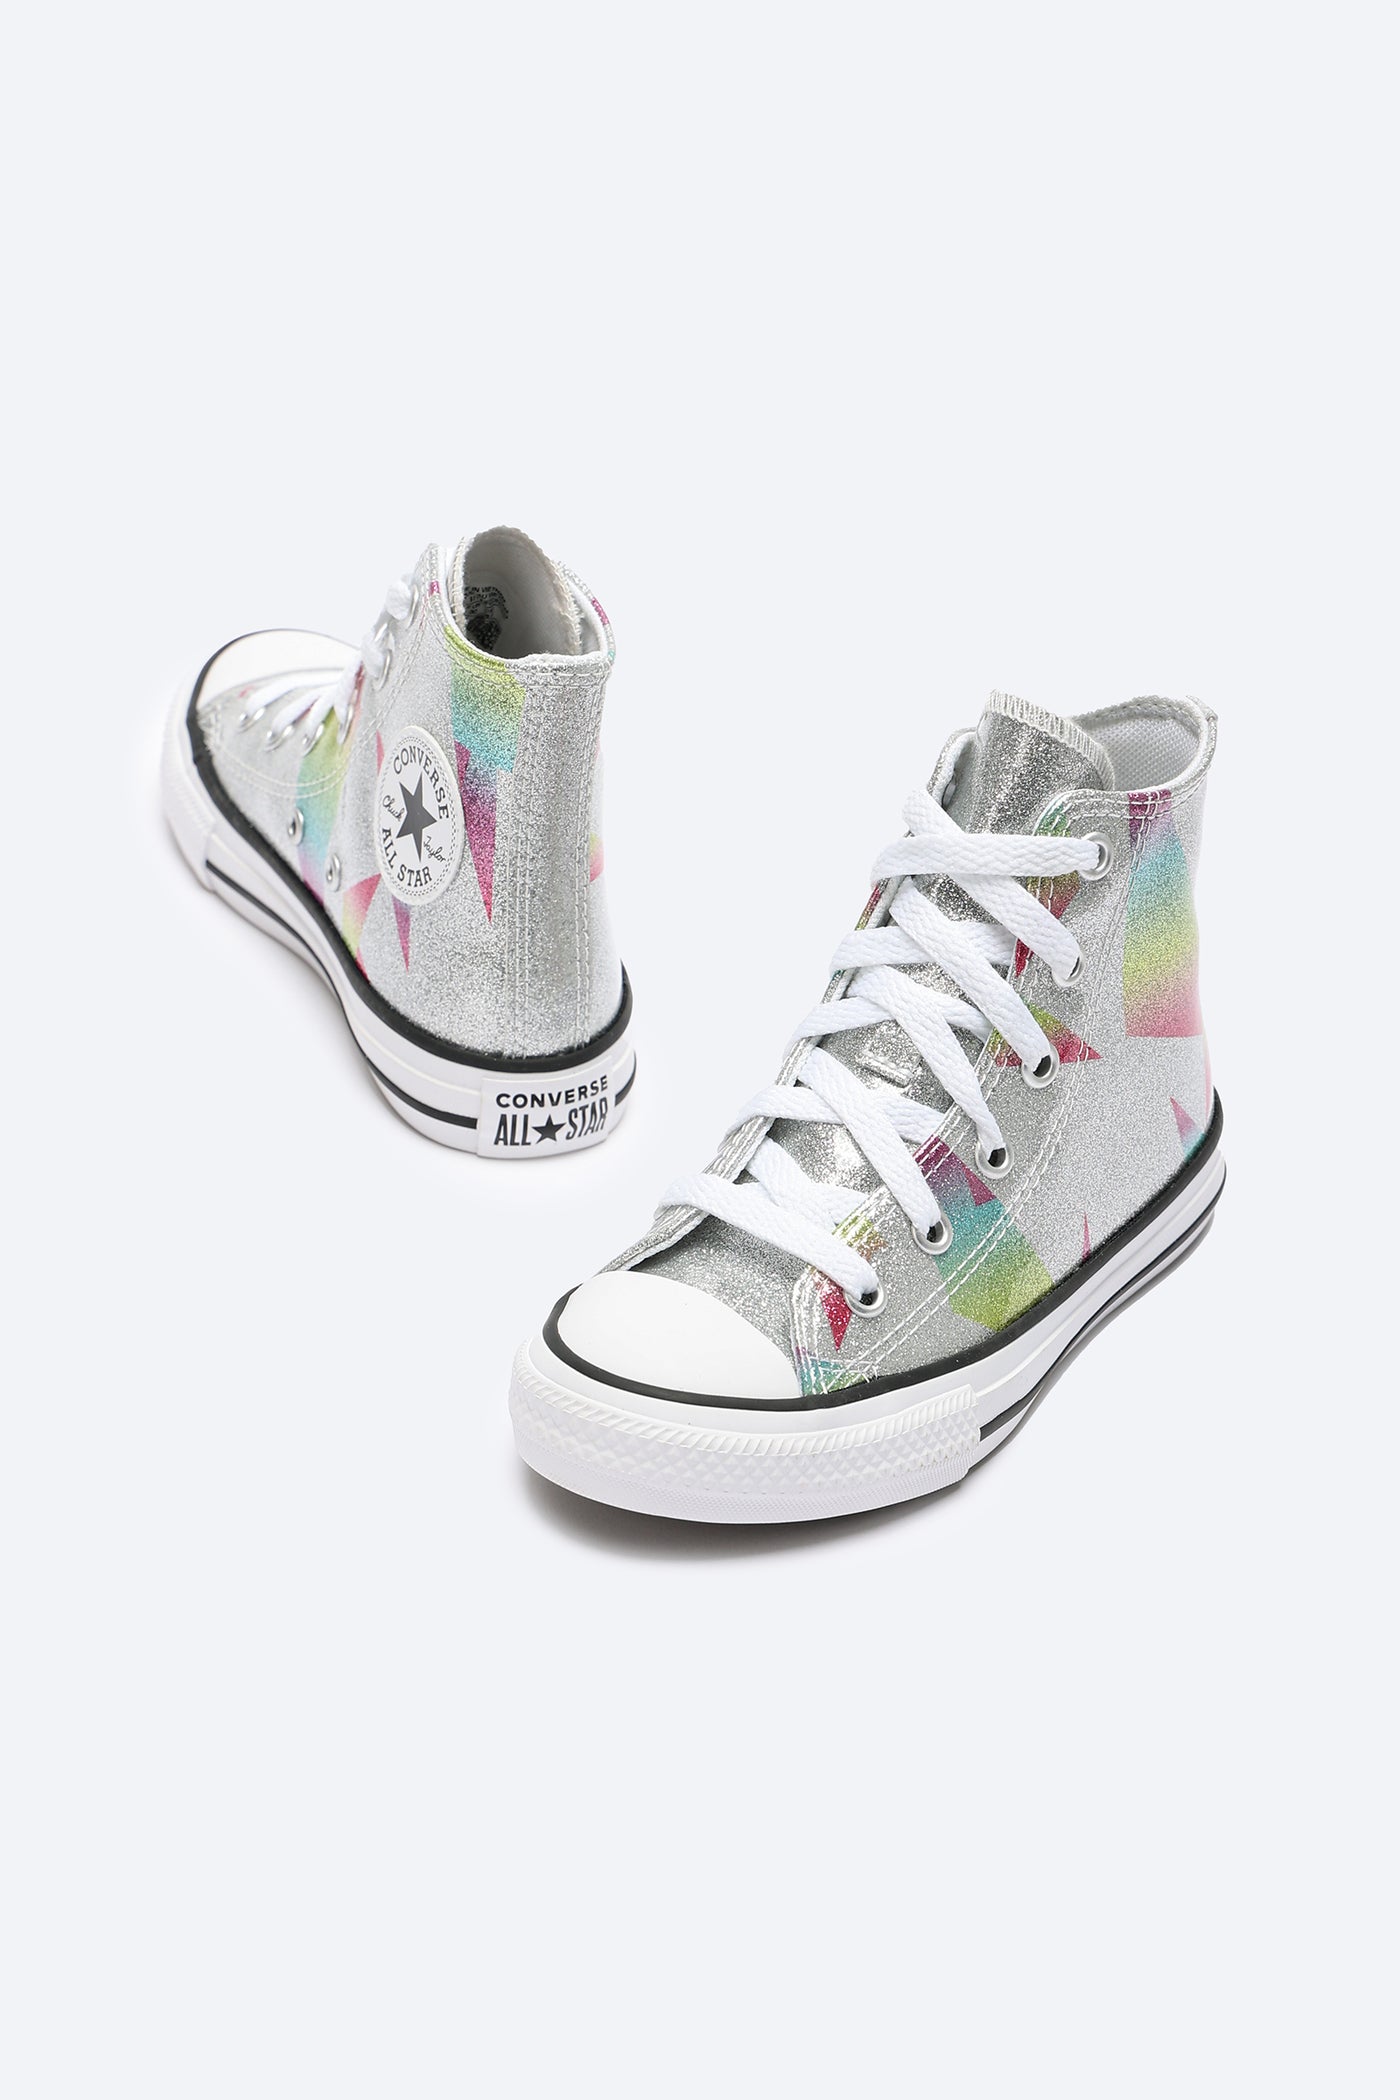 Kids Unisex Sneakers -  Chuck Taylor All Star Prism Glitter- Cruise High